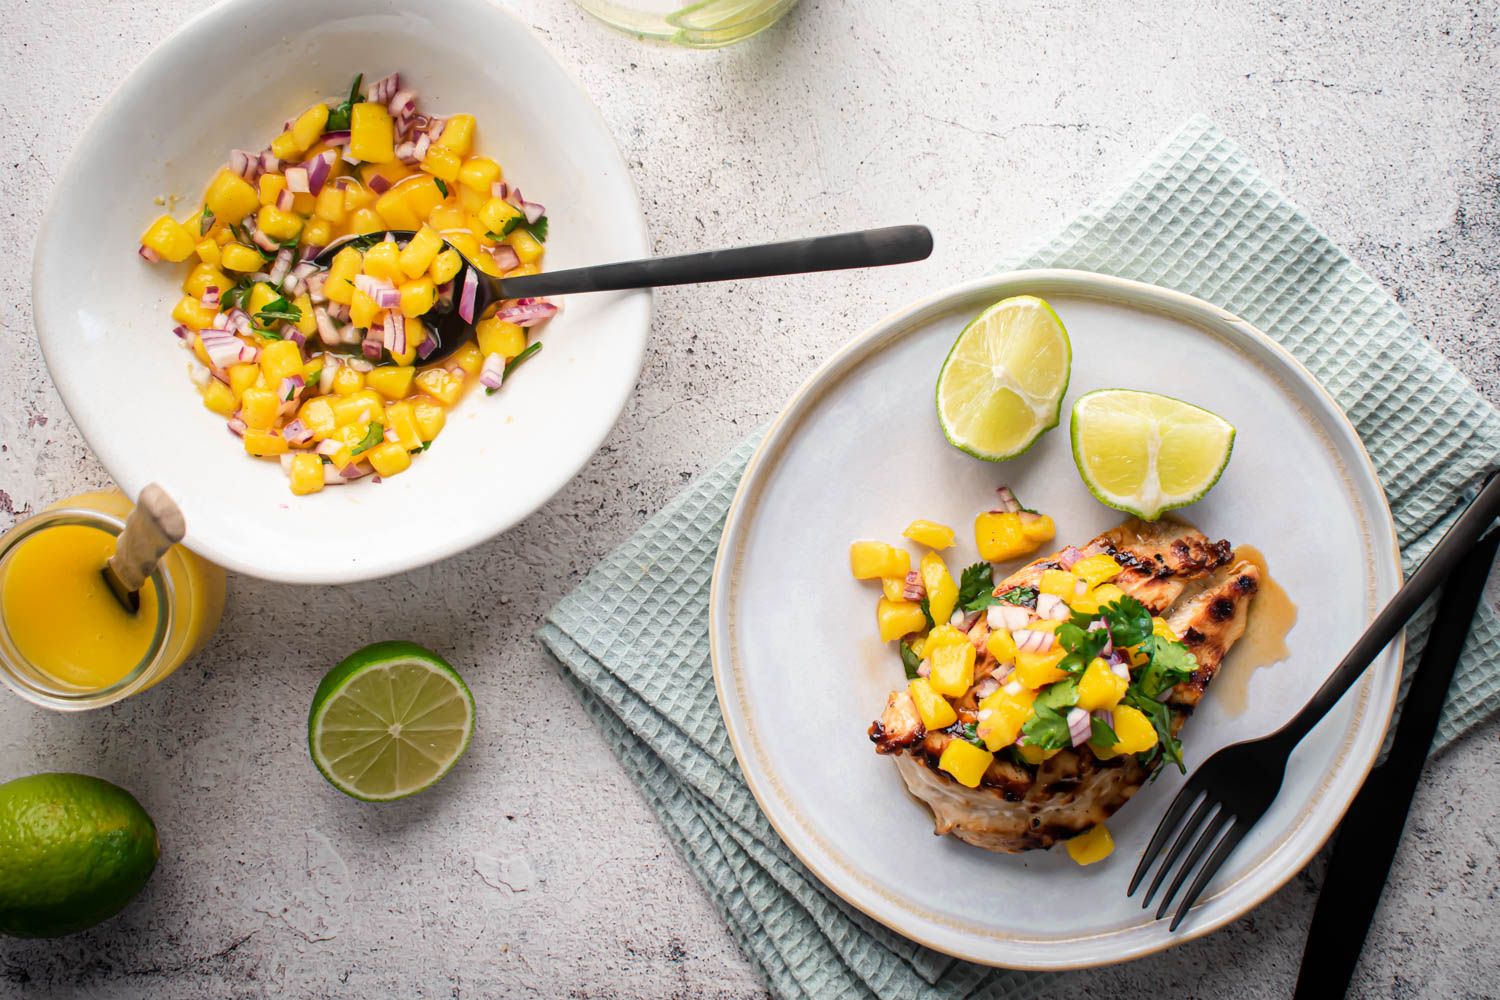 Grilled chicken with mango salsa on a white plate with limes.